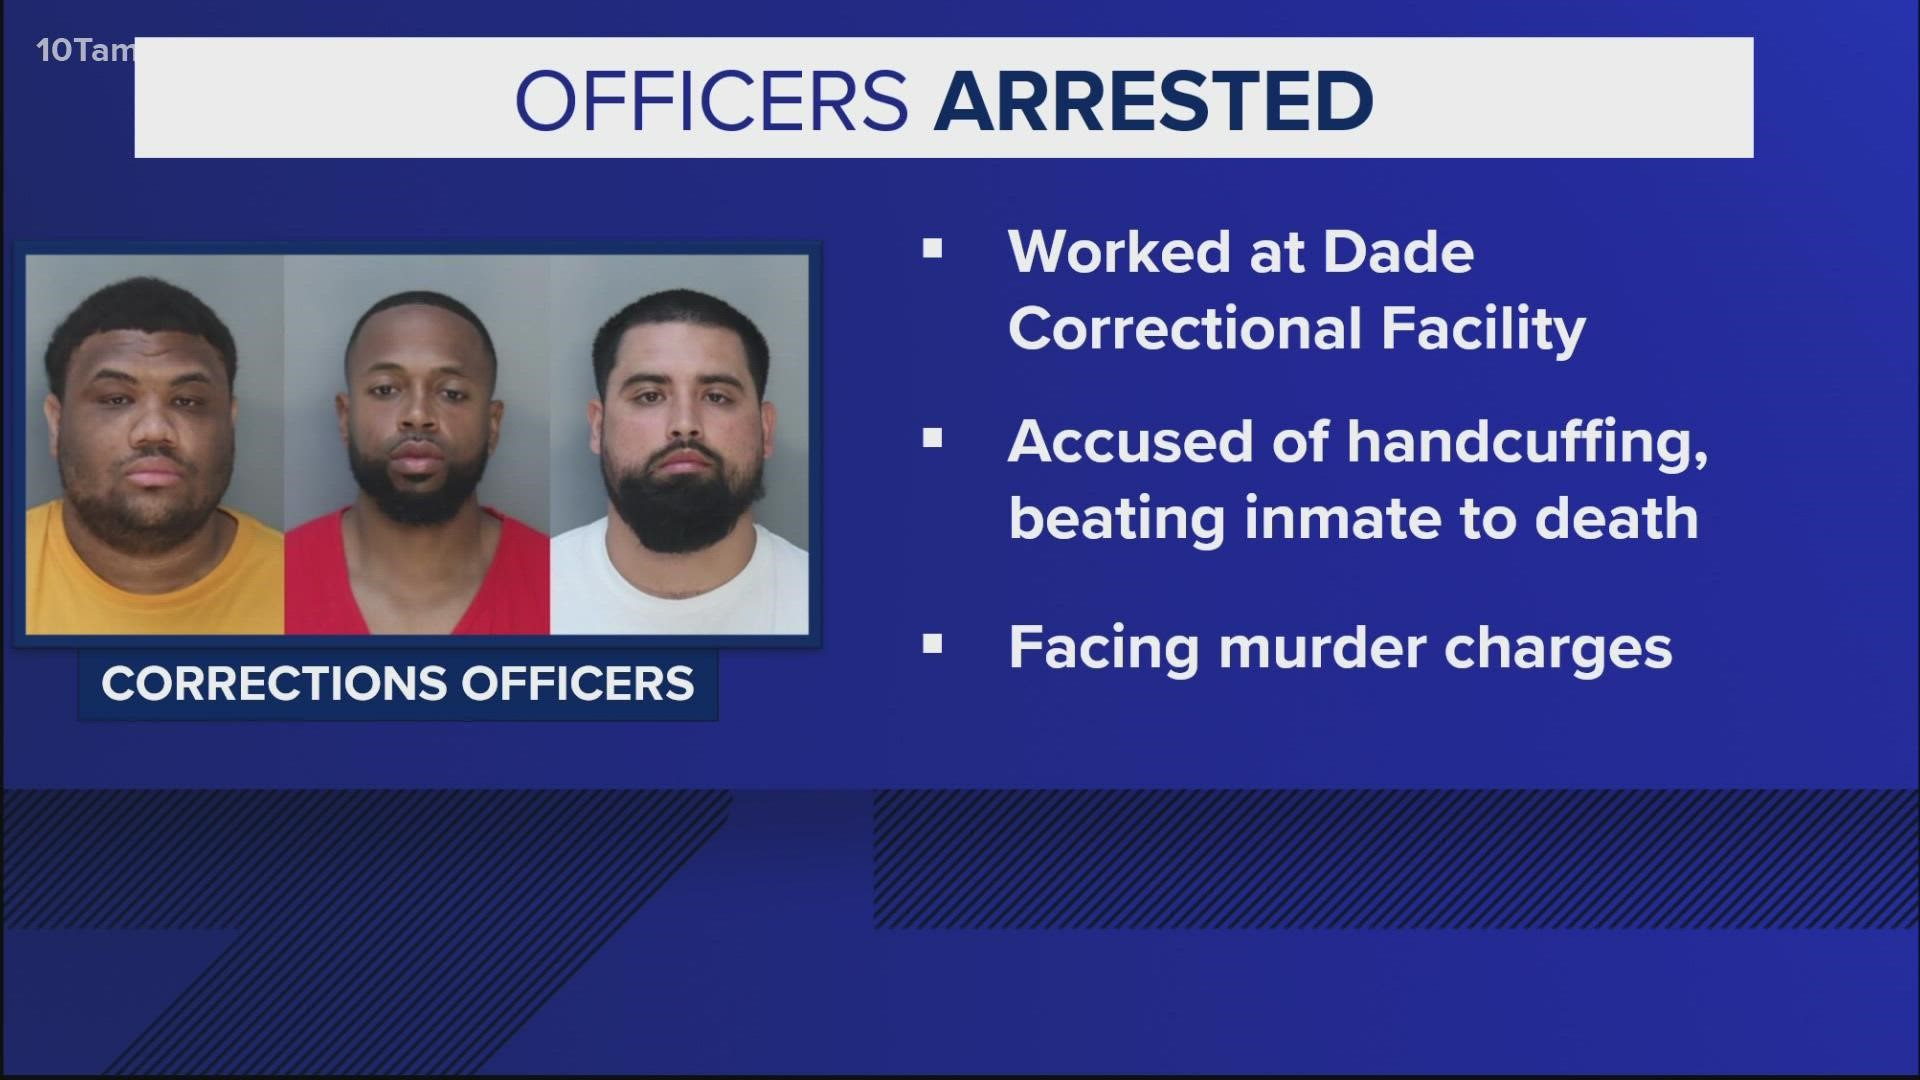 Law enforcement says a fourth correctional officer is still at large.